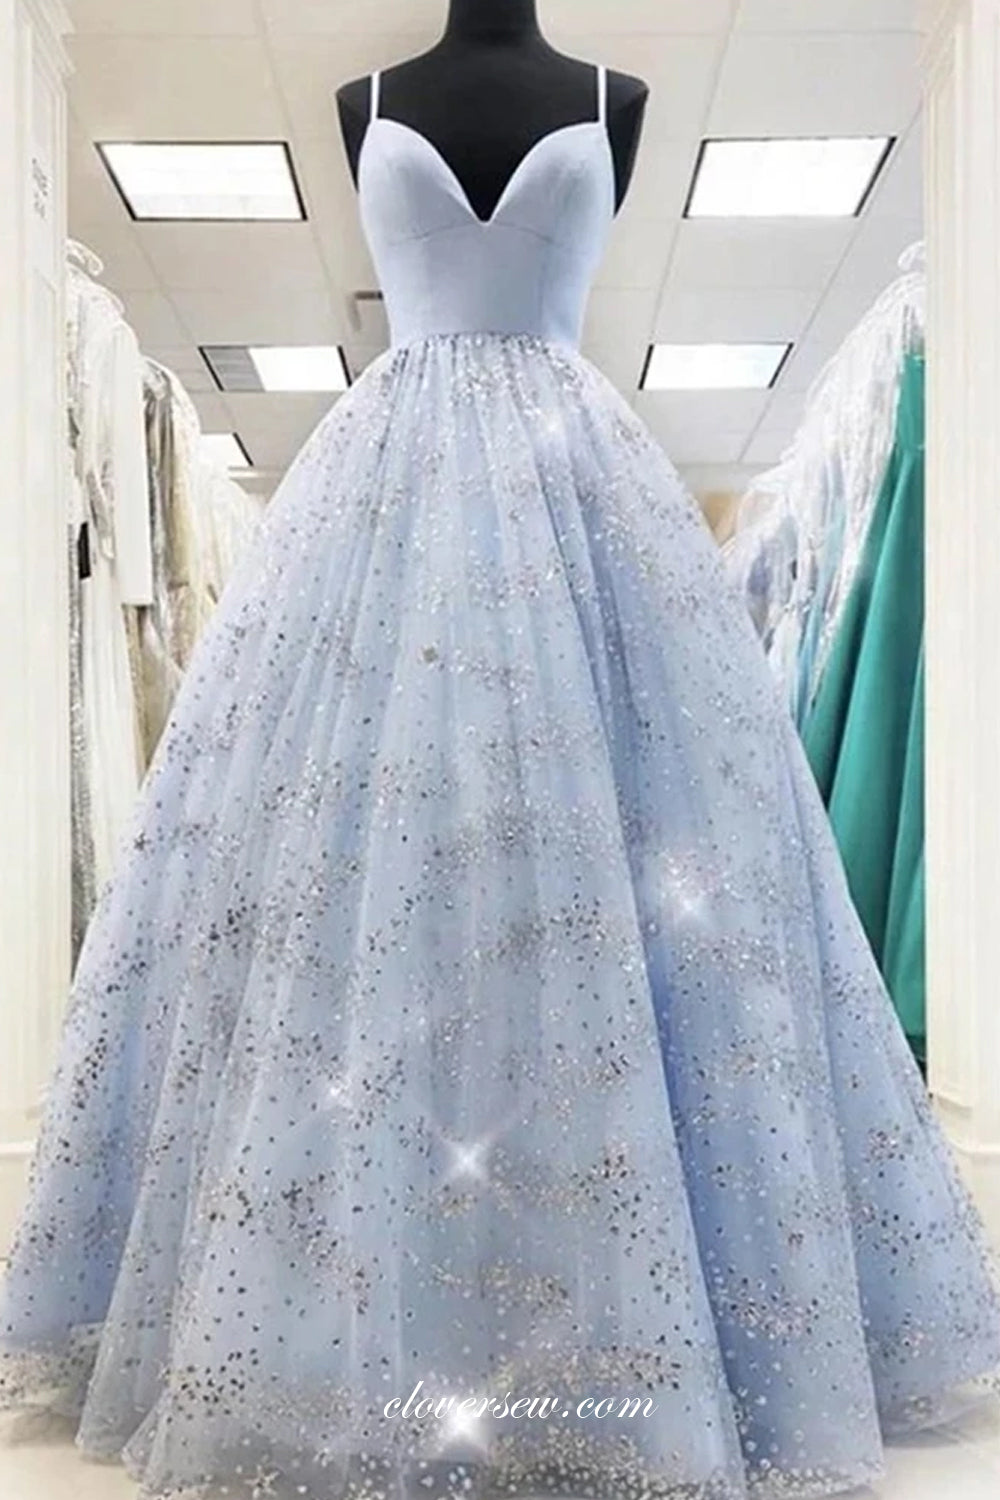 Pale Blue Satin Sequined Tulle Charming From Dresses For Teens, CP0754